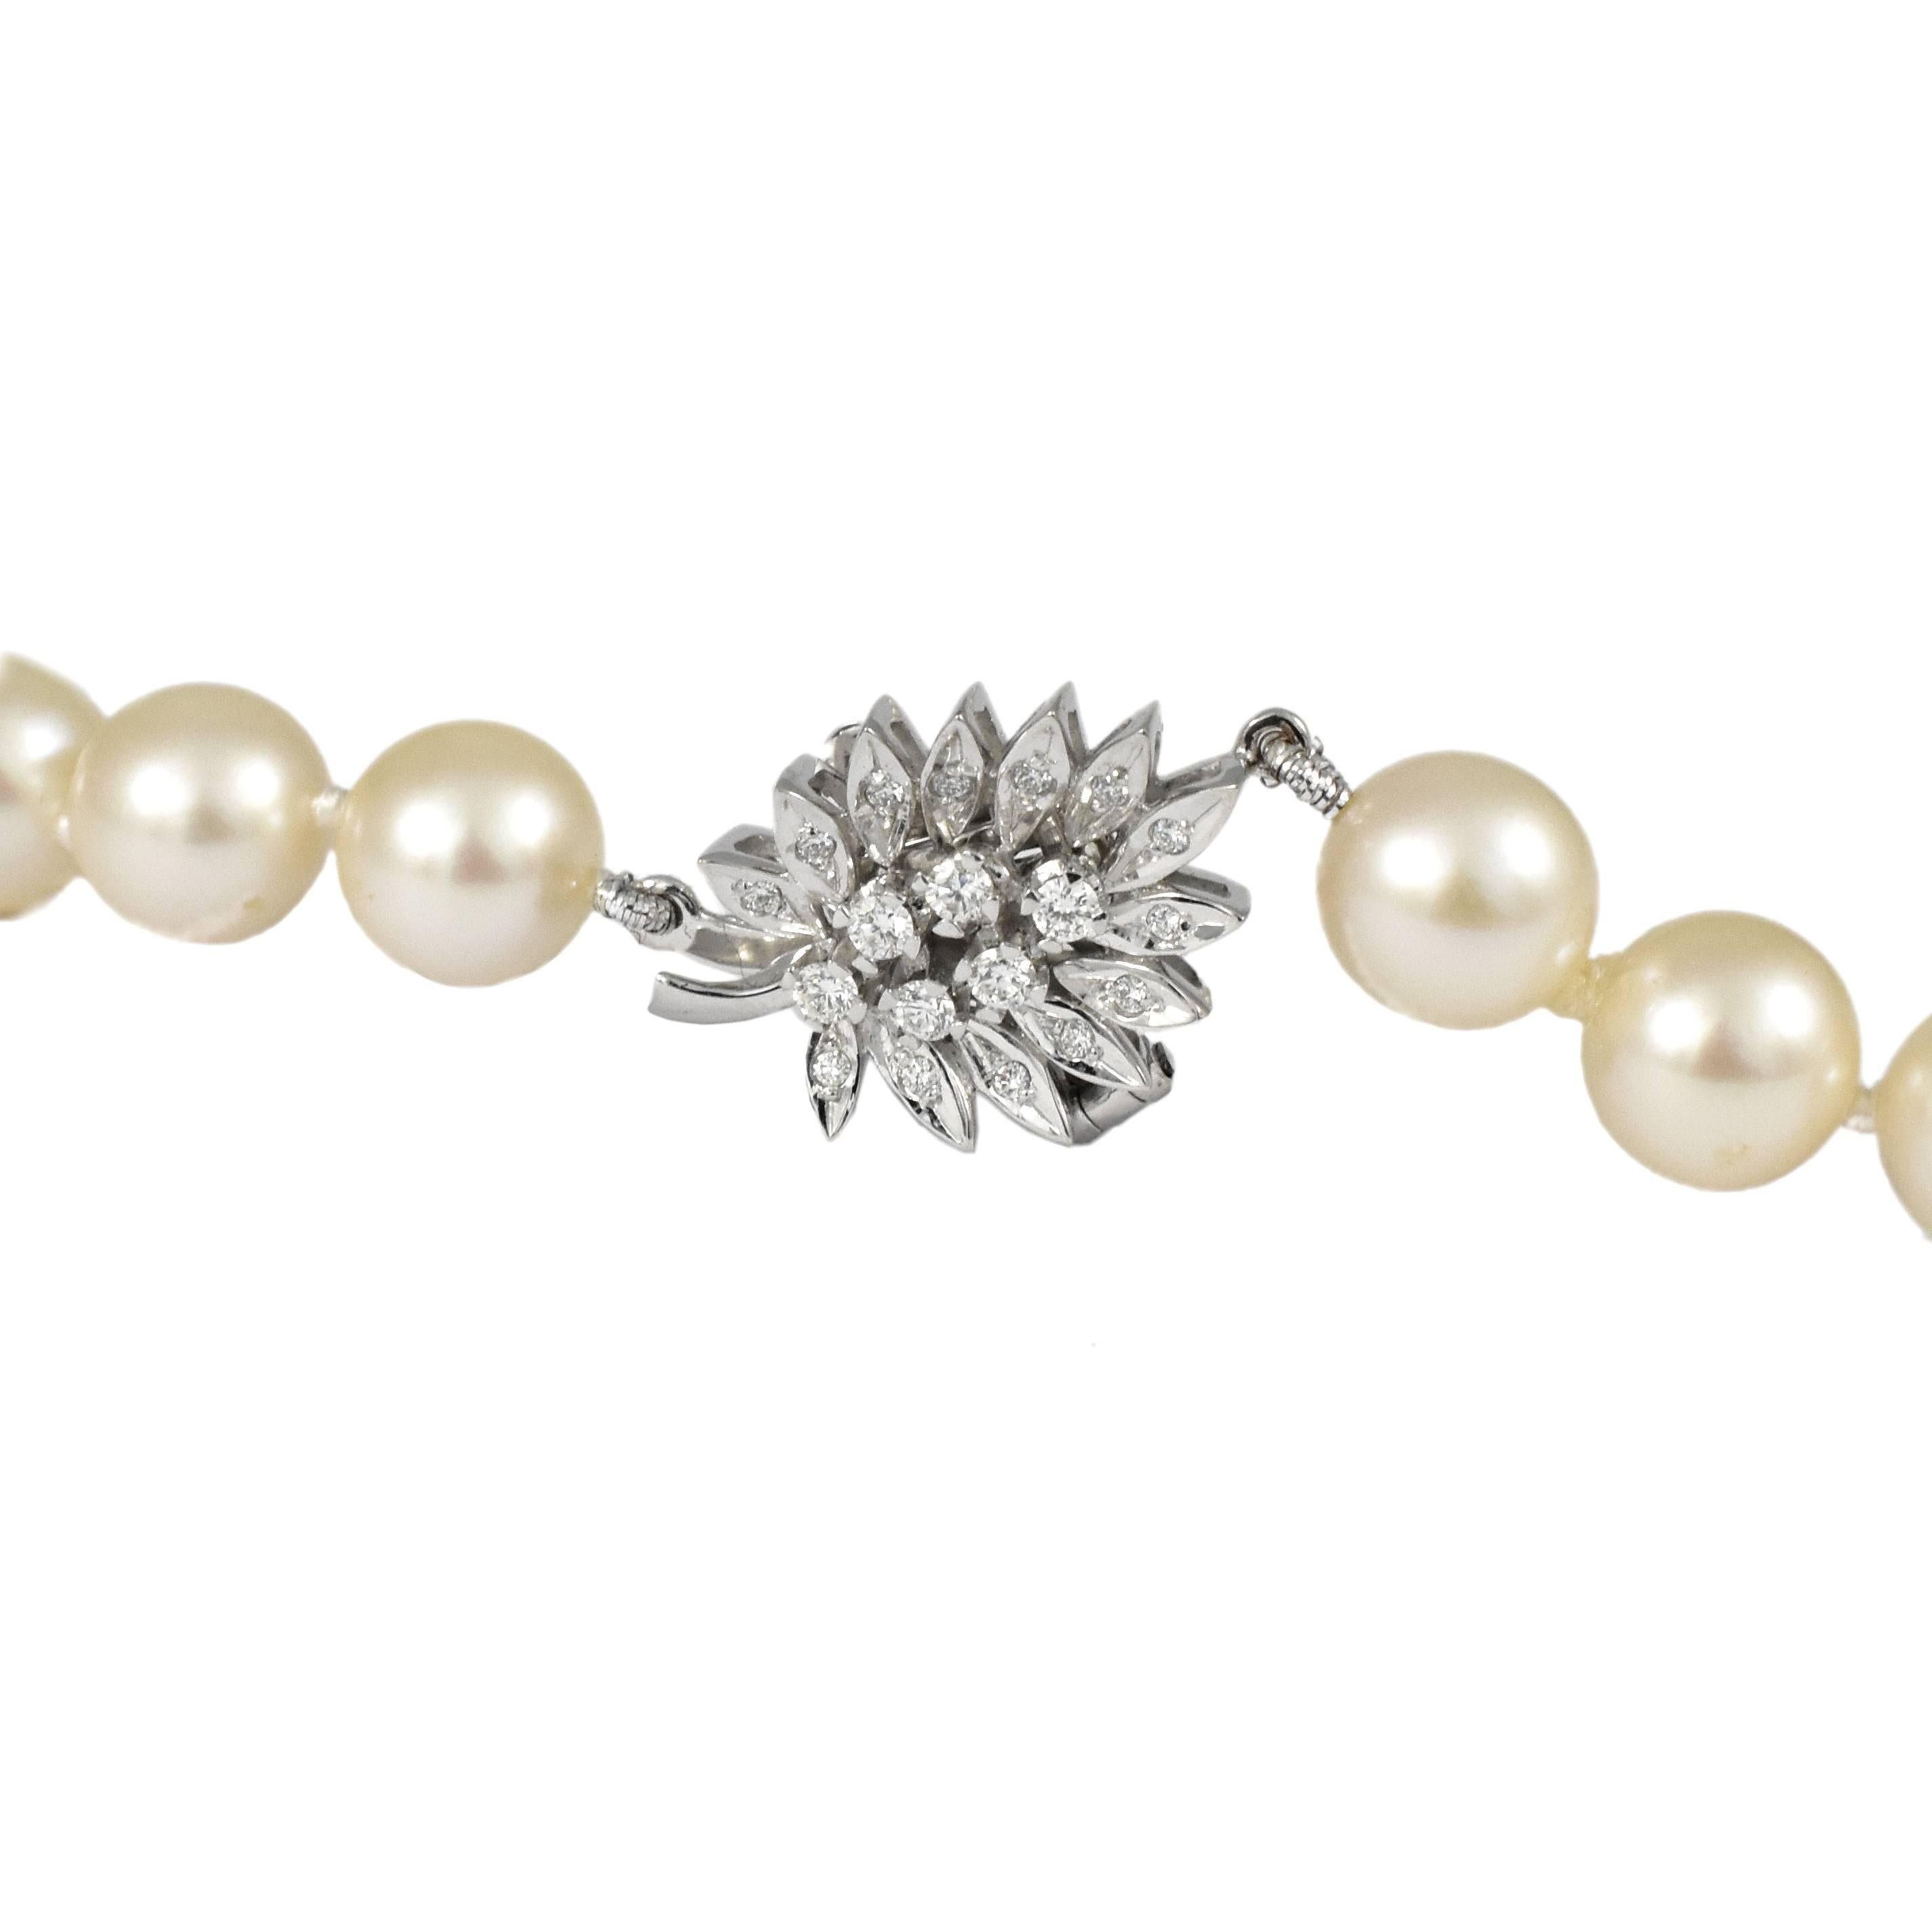 Contemporary 18K Gold Daou Handmade Pearl Necklace with detailed Diamond Clasp in Leaf design For Sale